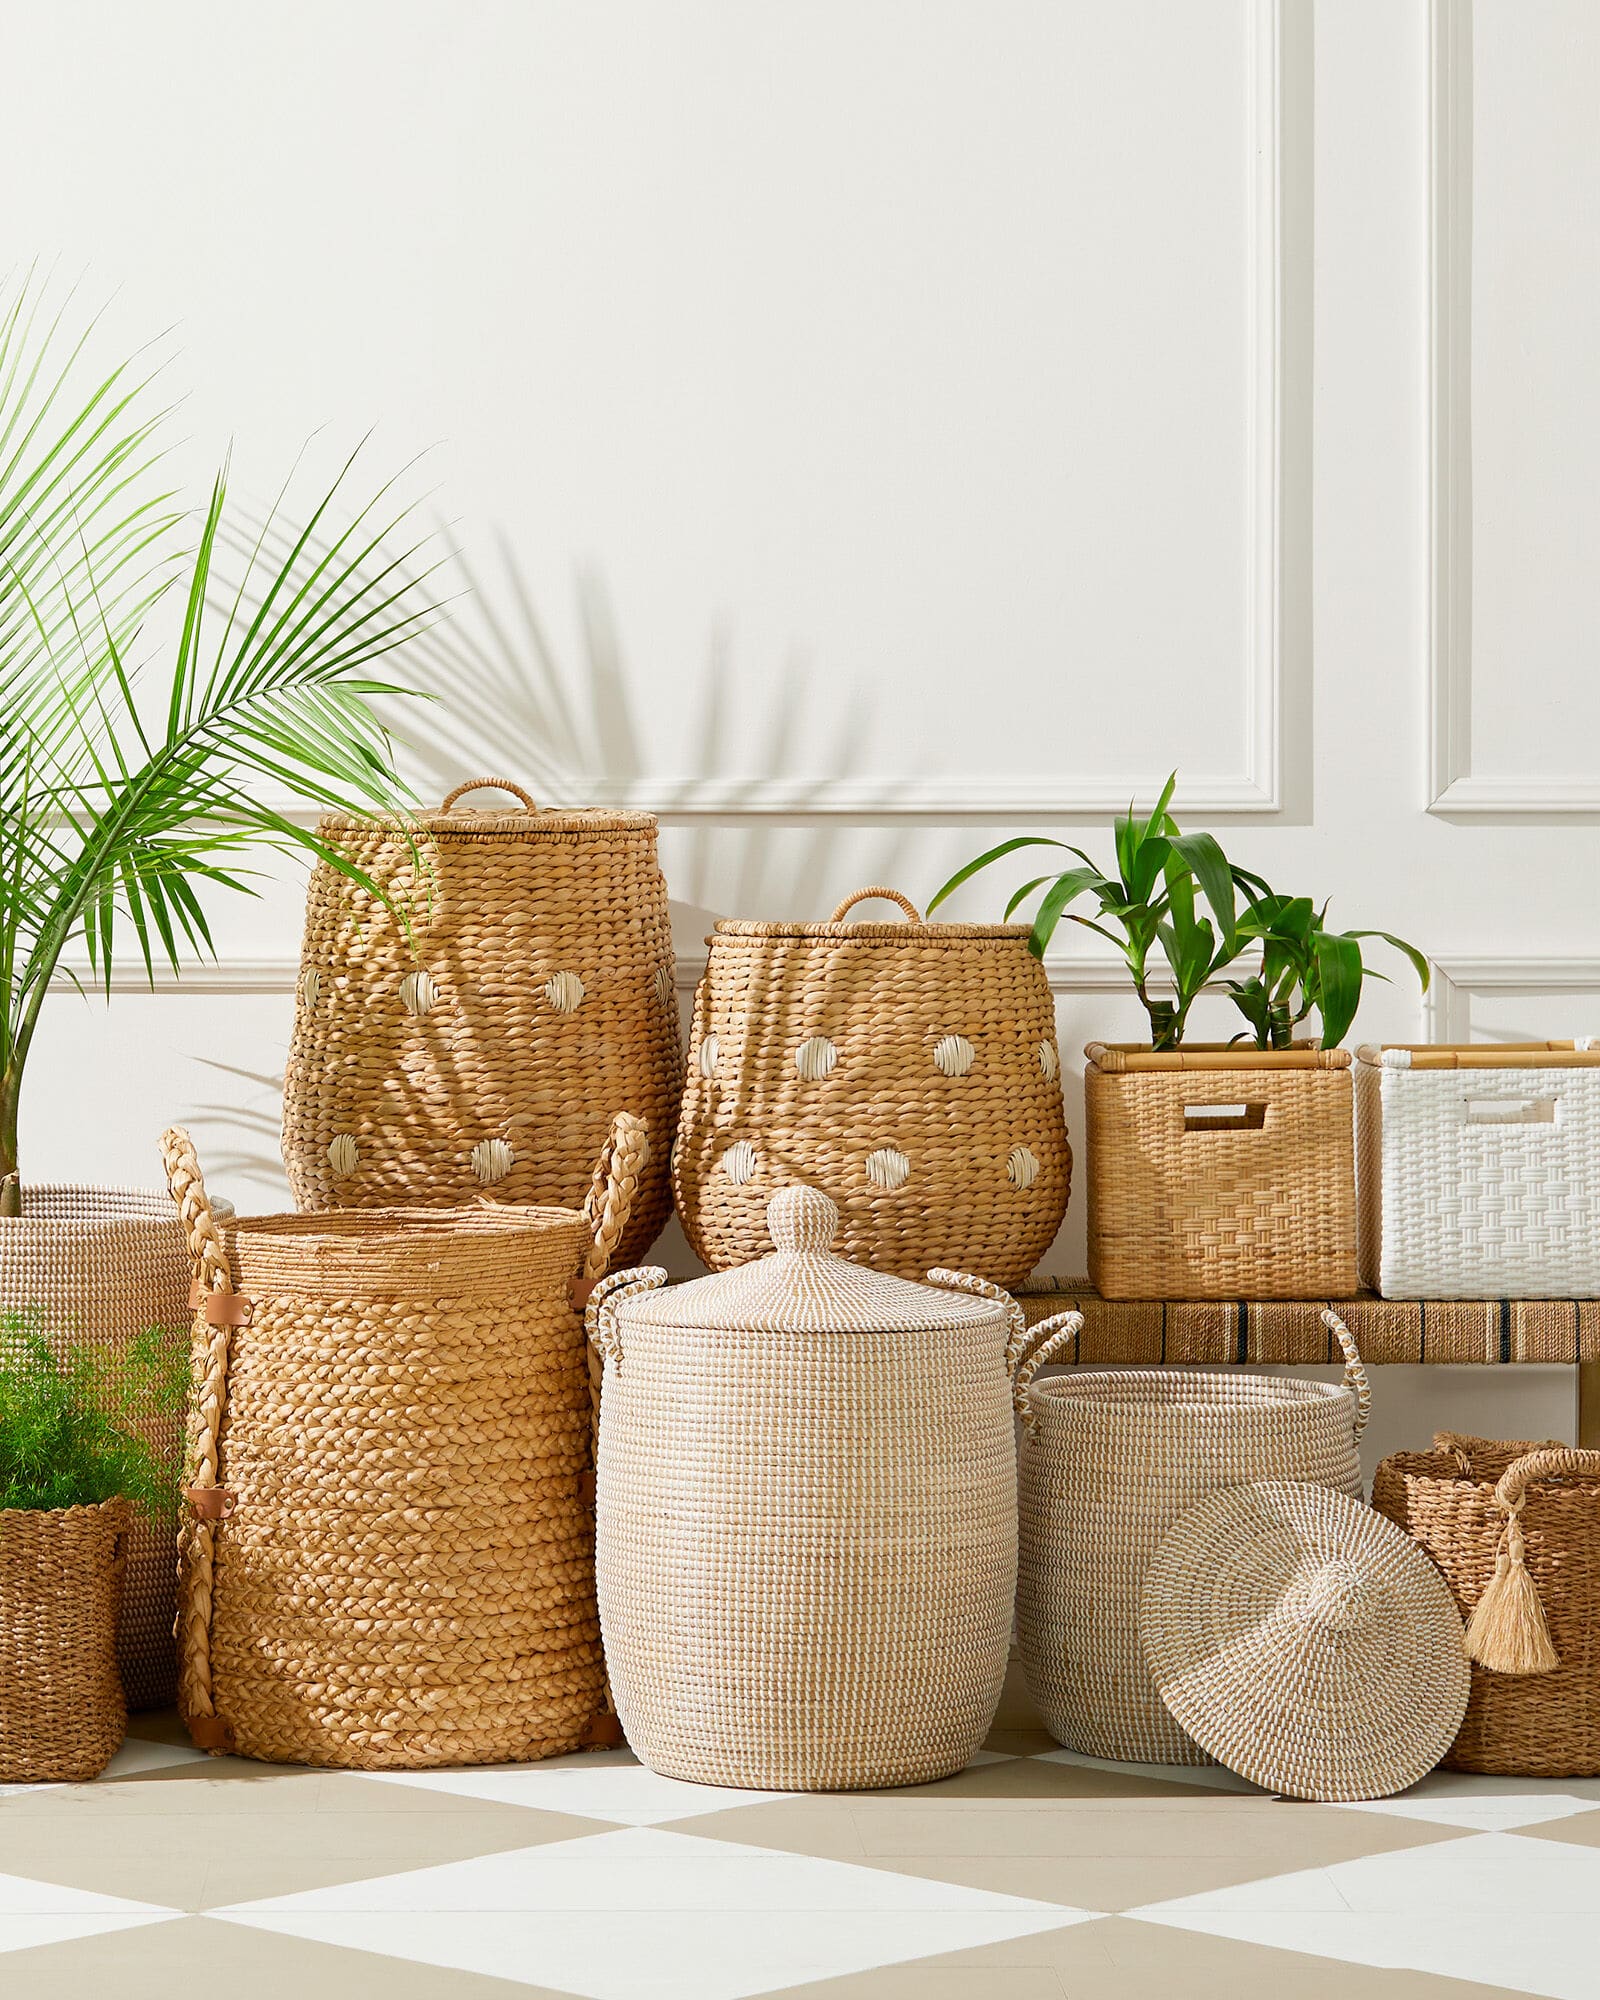 Favorite storage baskets from Serena & Lily ,gracious in size and perfect for organizing your home. organization | get organized | organize | organizing -effortlessly chic